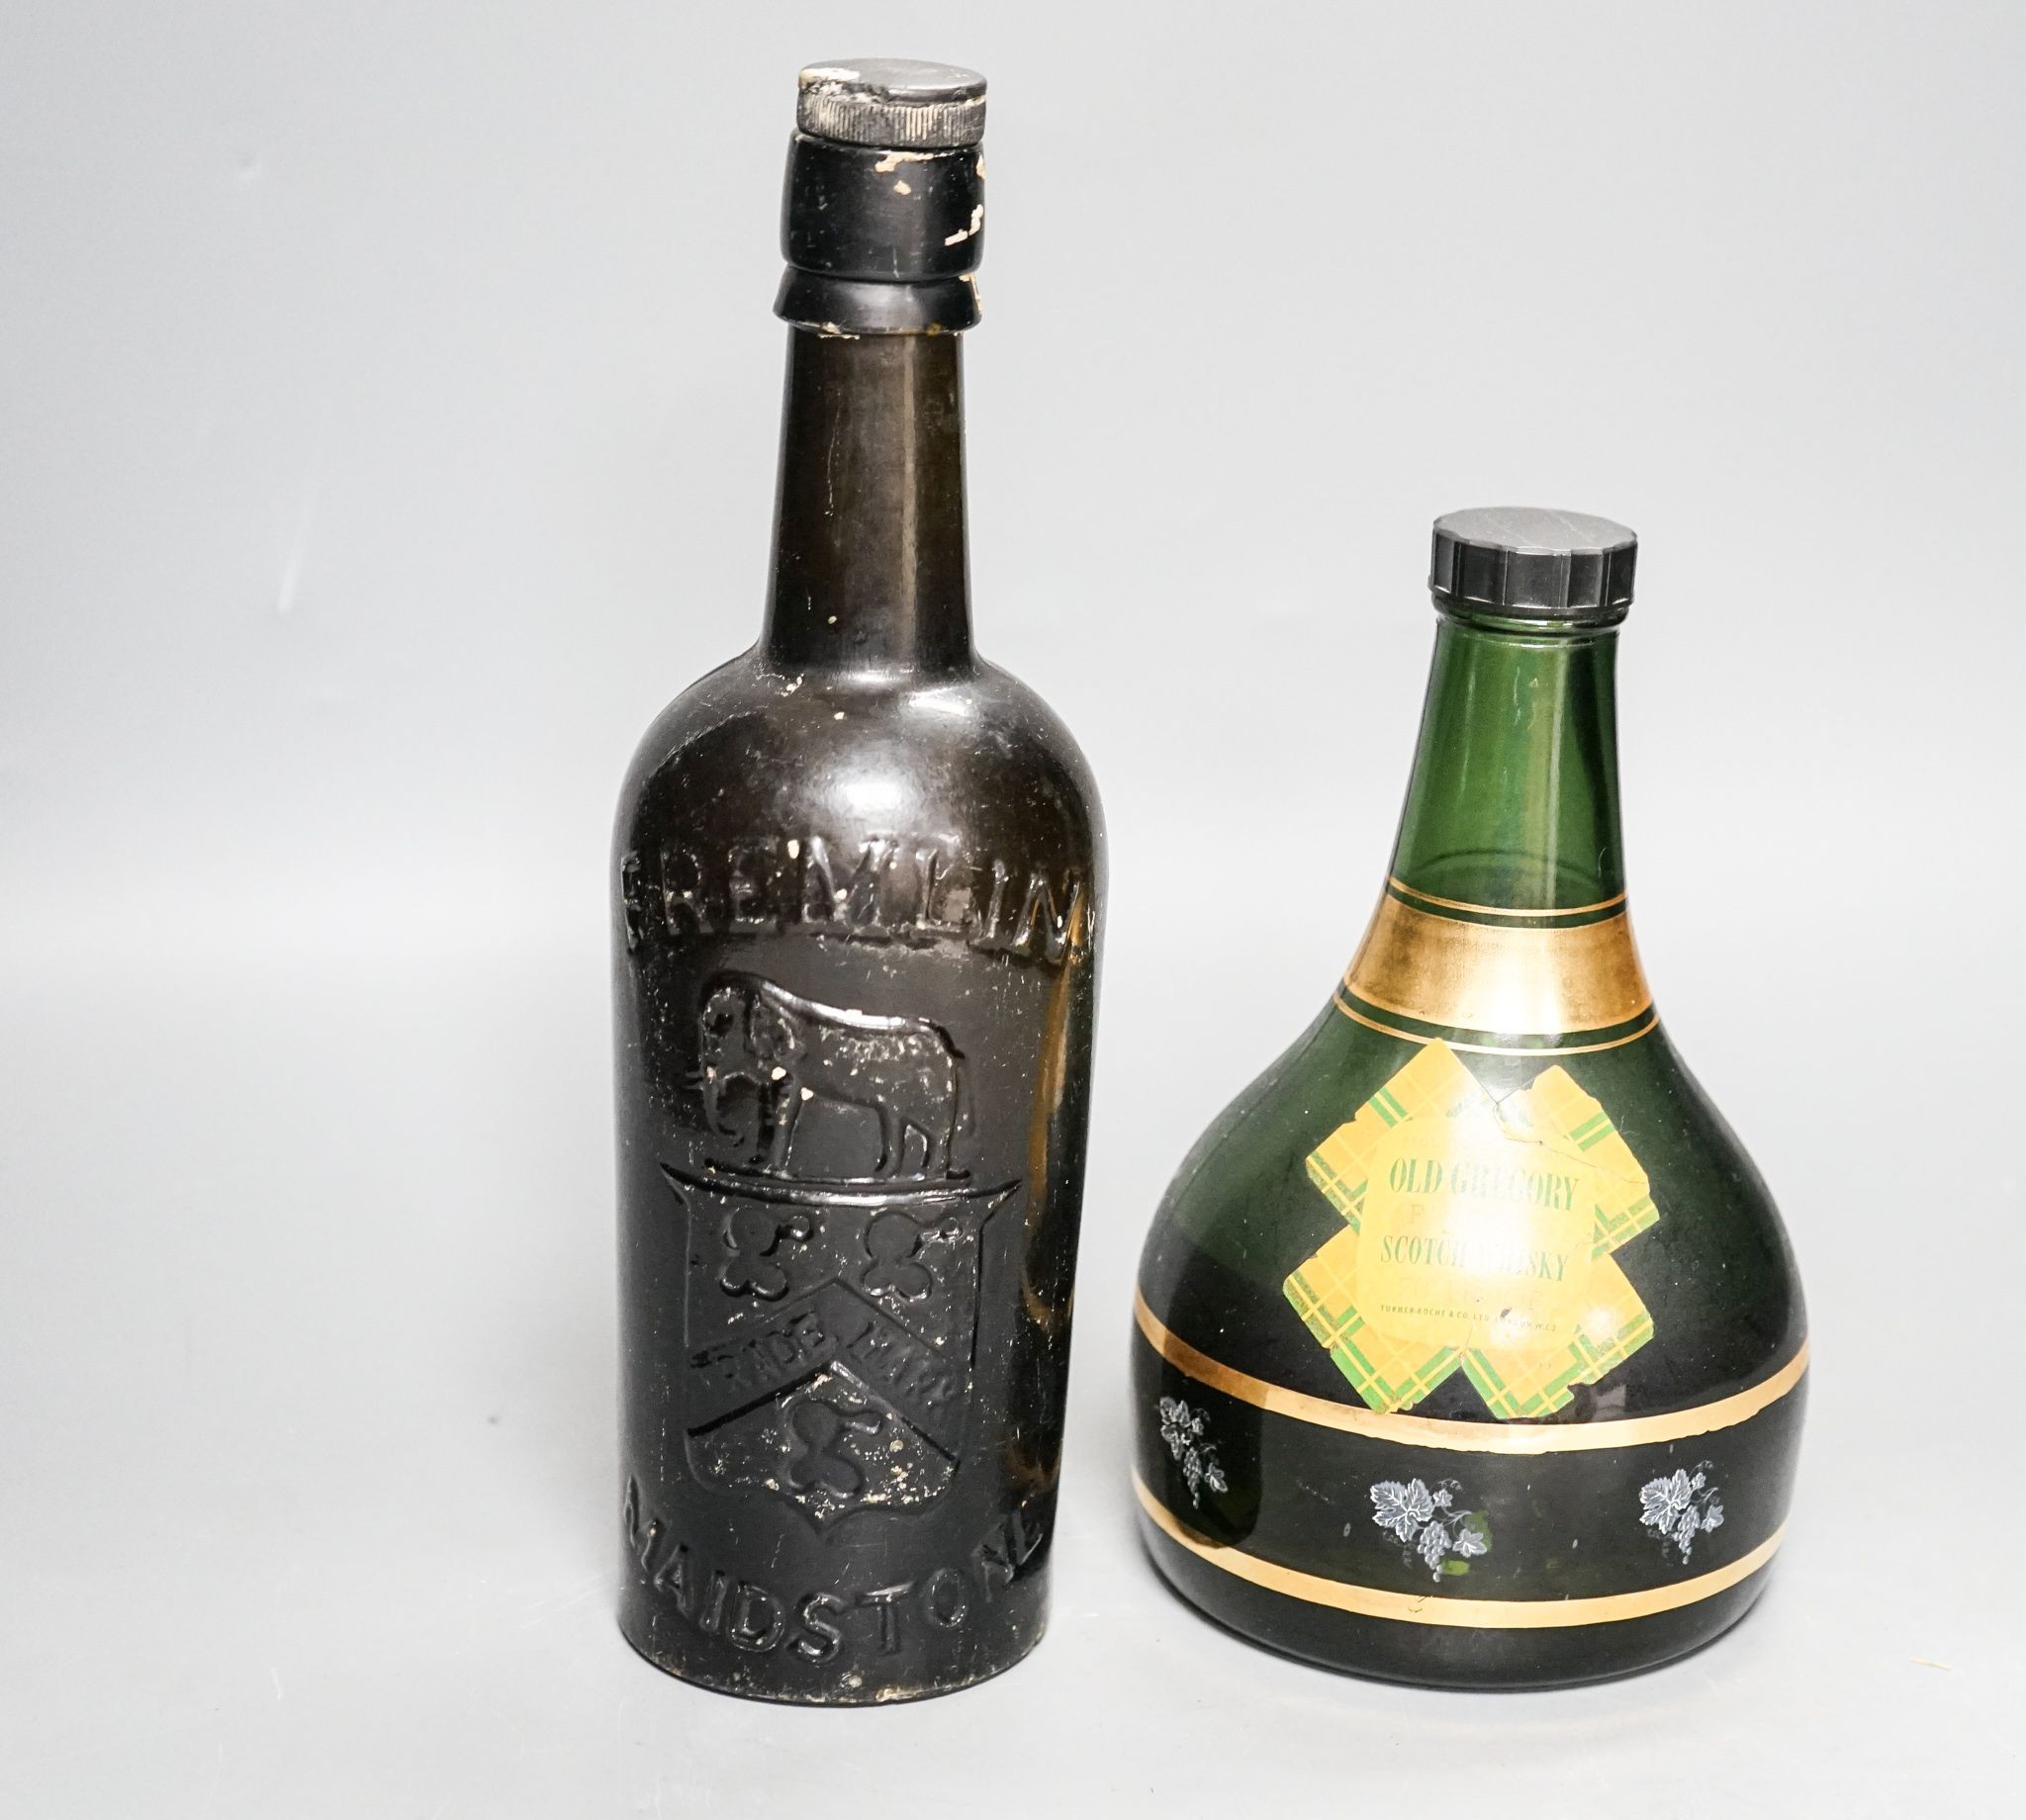 An old Fremlin of Maidstone beer bottle and an old Gregory Scotch whisky musical bottle